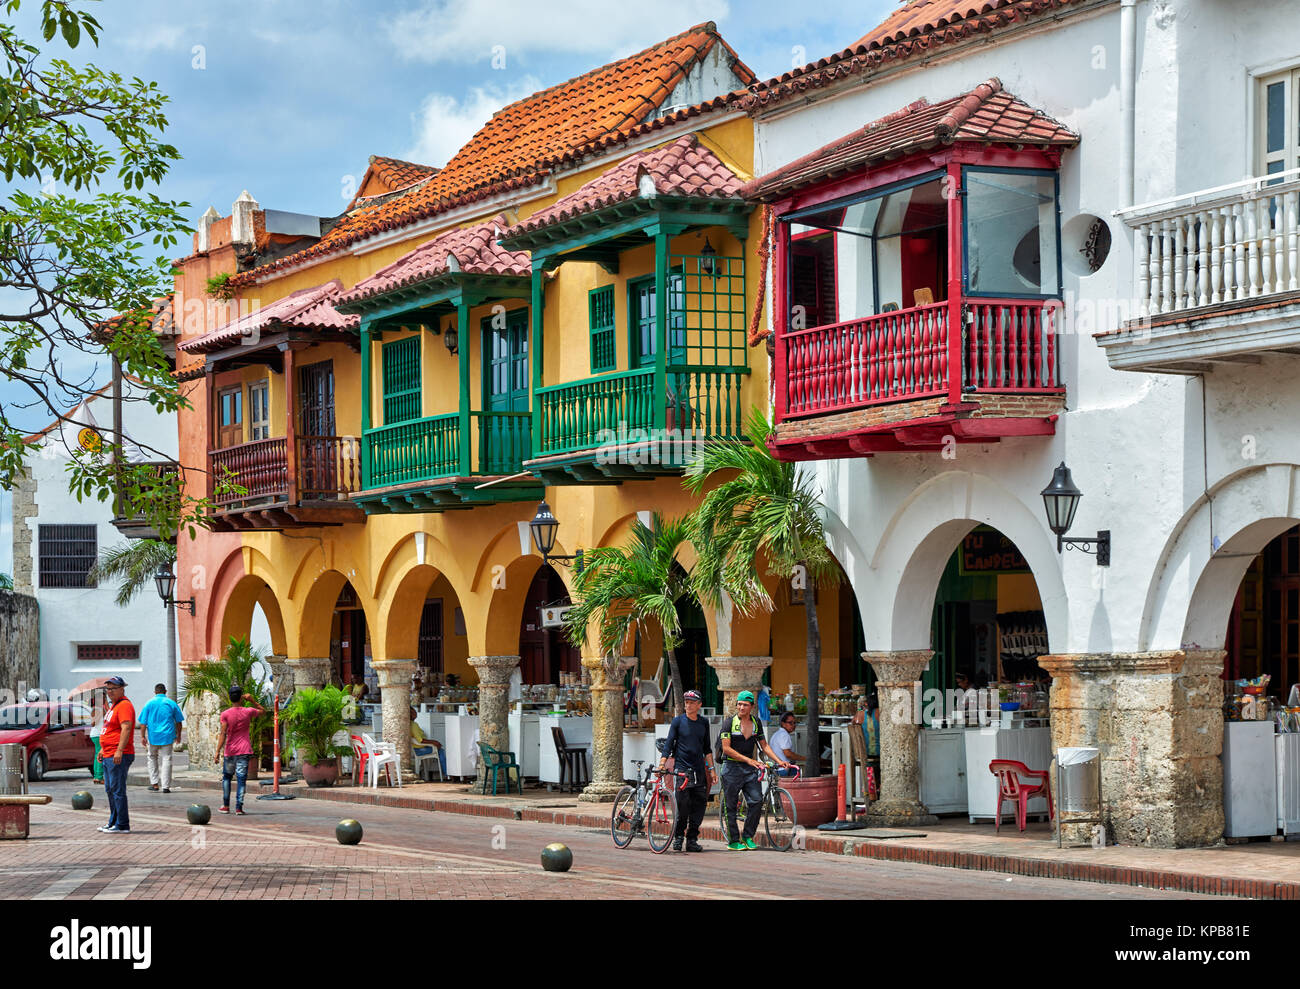 typical colorful facades with balconys of houses at Plaza de Los Coches, Cartagena de Indias, Colombia, South America Stock Photo